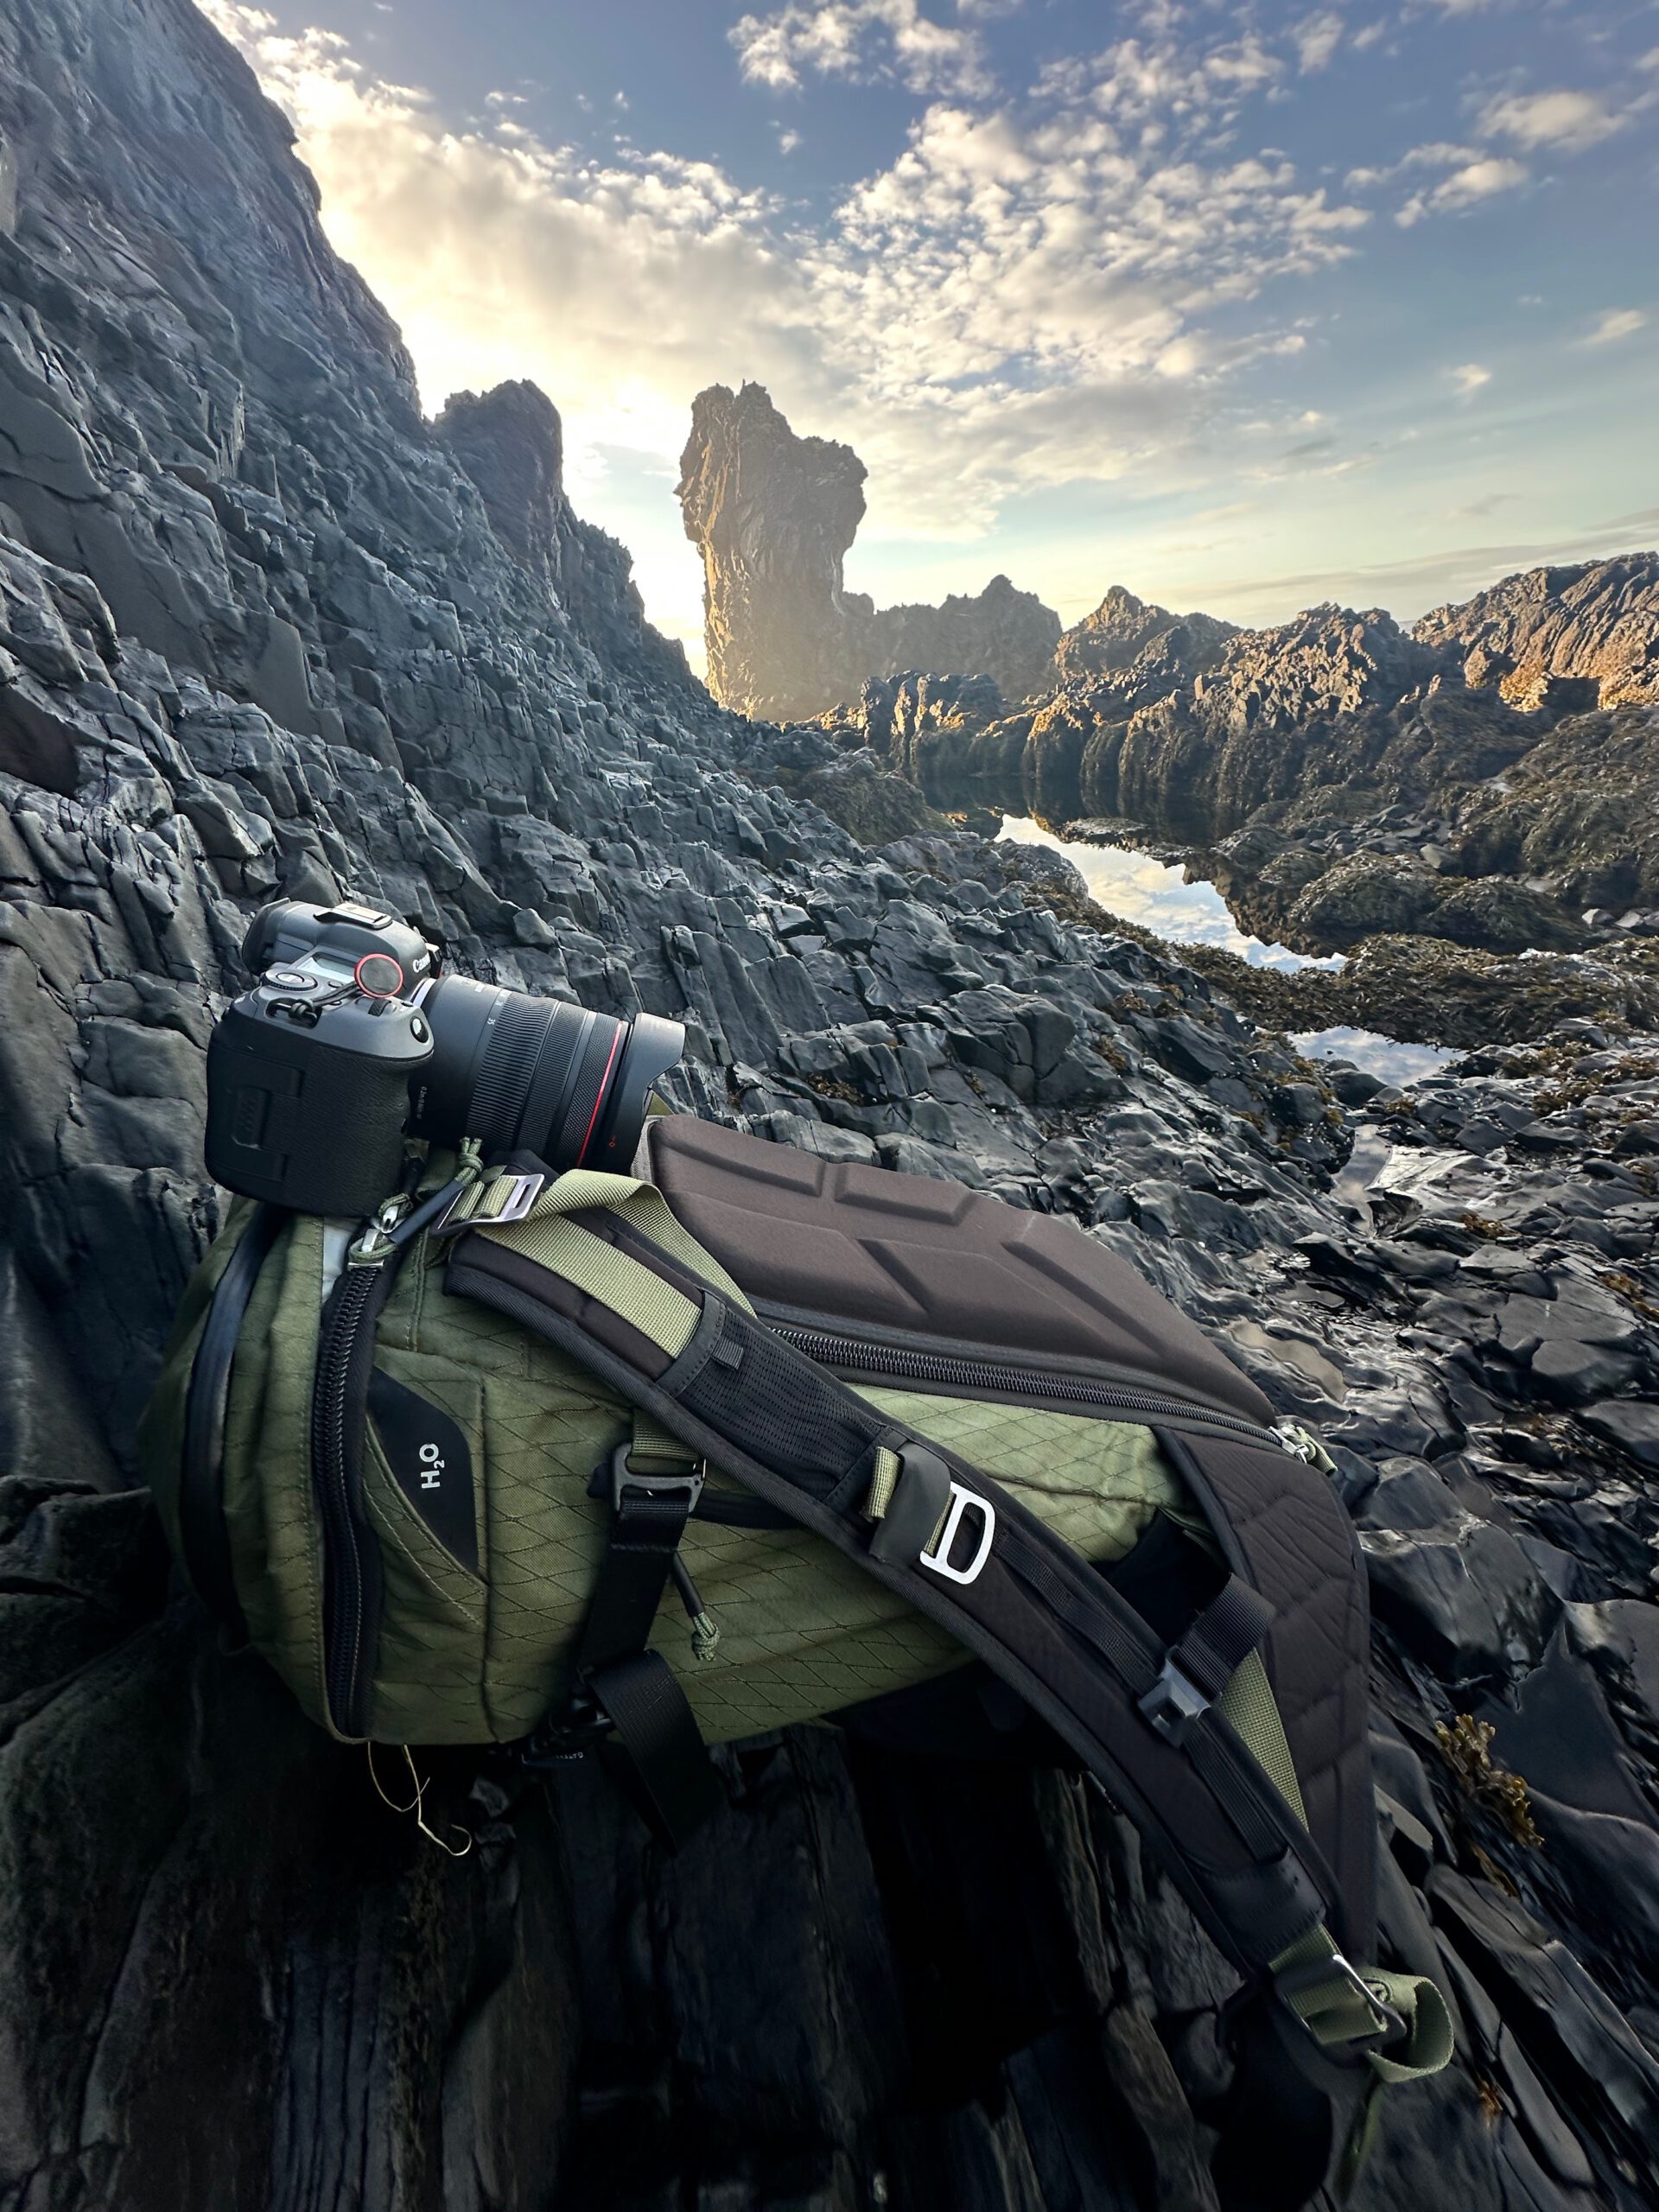 Outdoor & Photography Gear You Need On A Photo Workshop